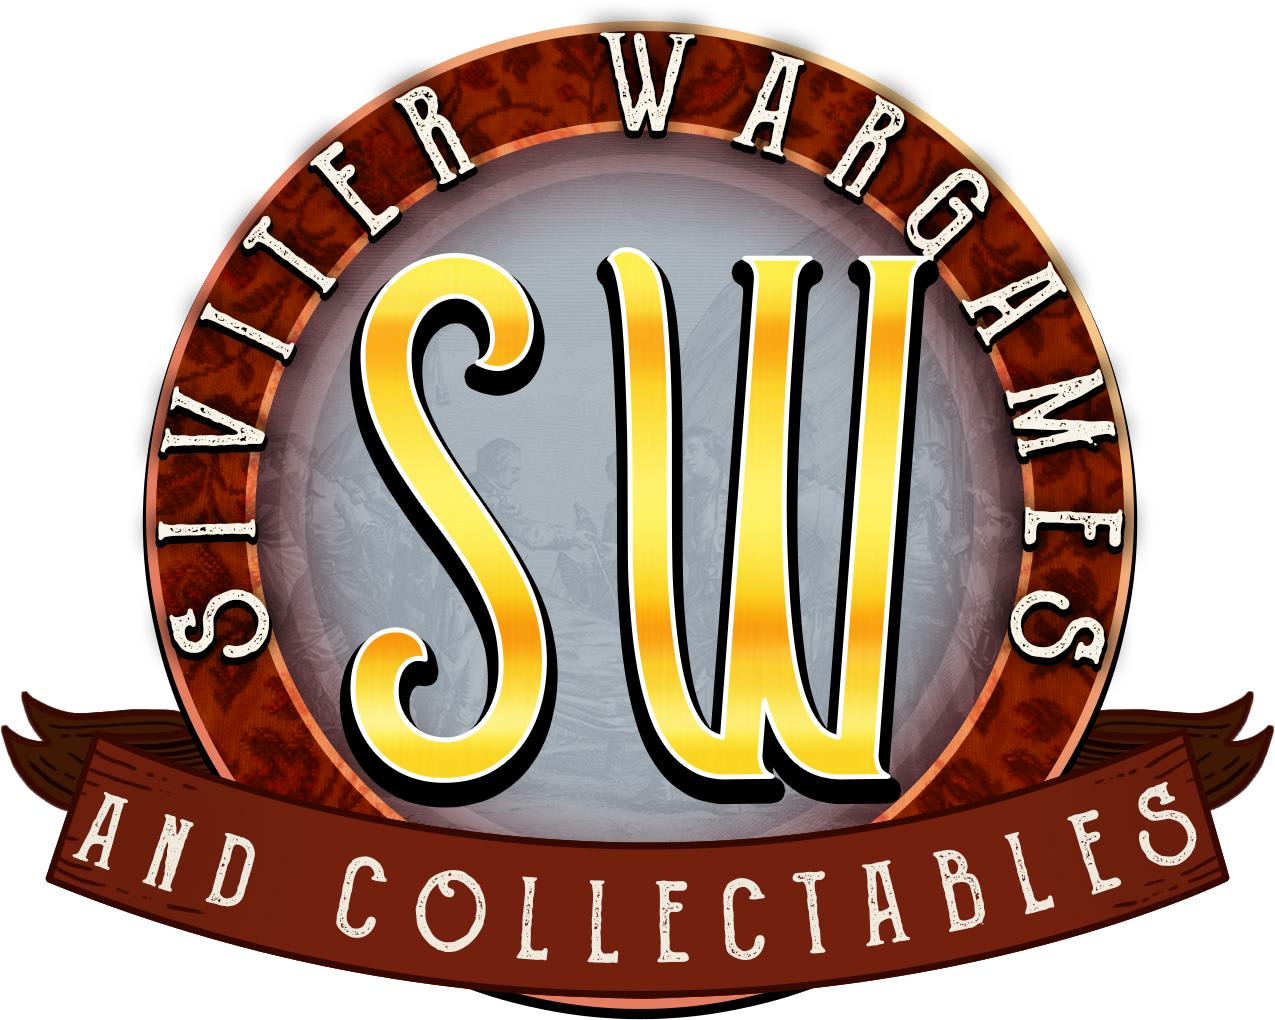 Siviter Wargames & Collectibles Kingswinford 01384 860547